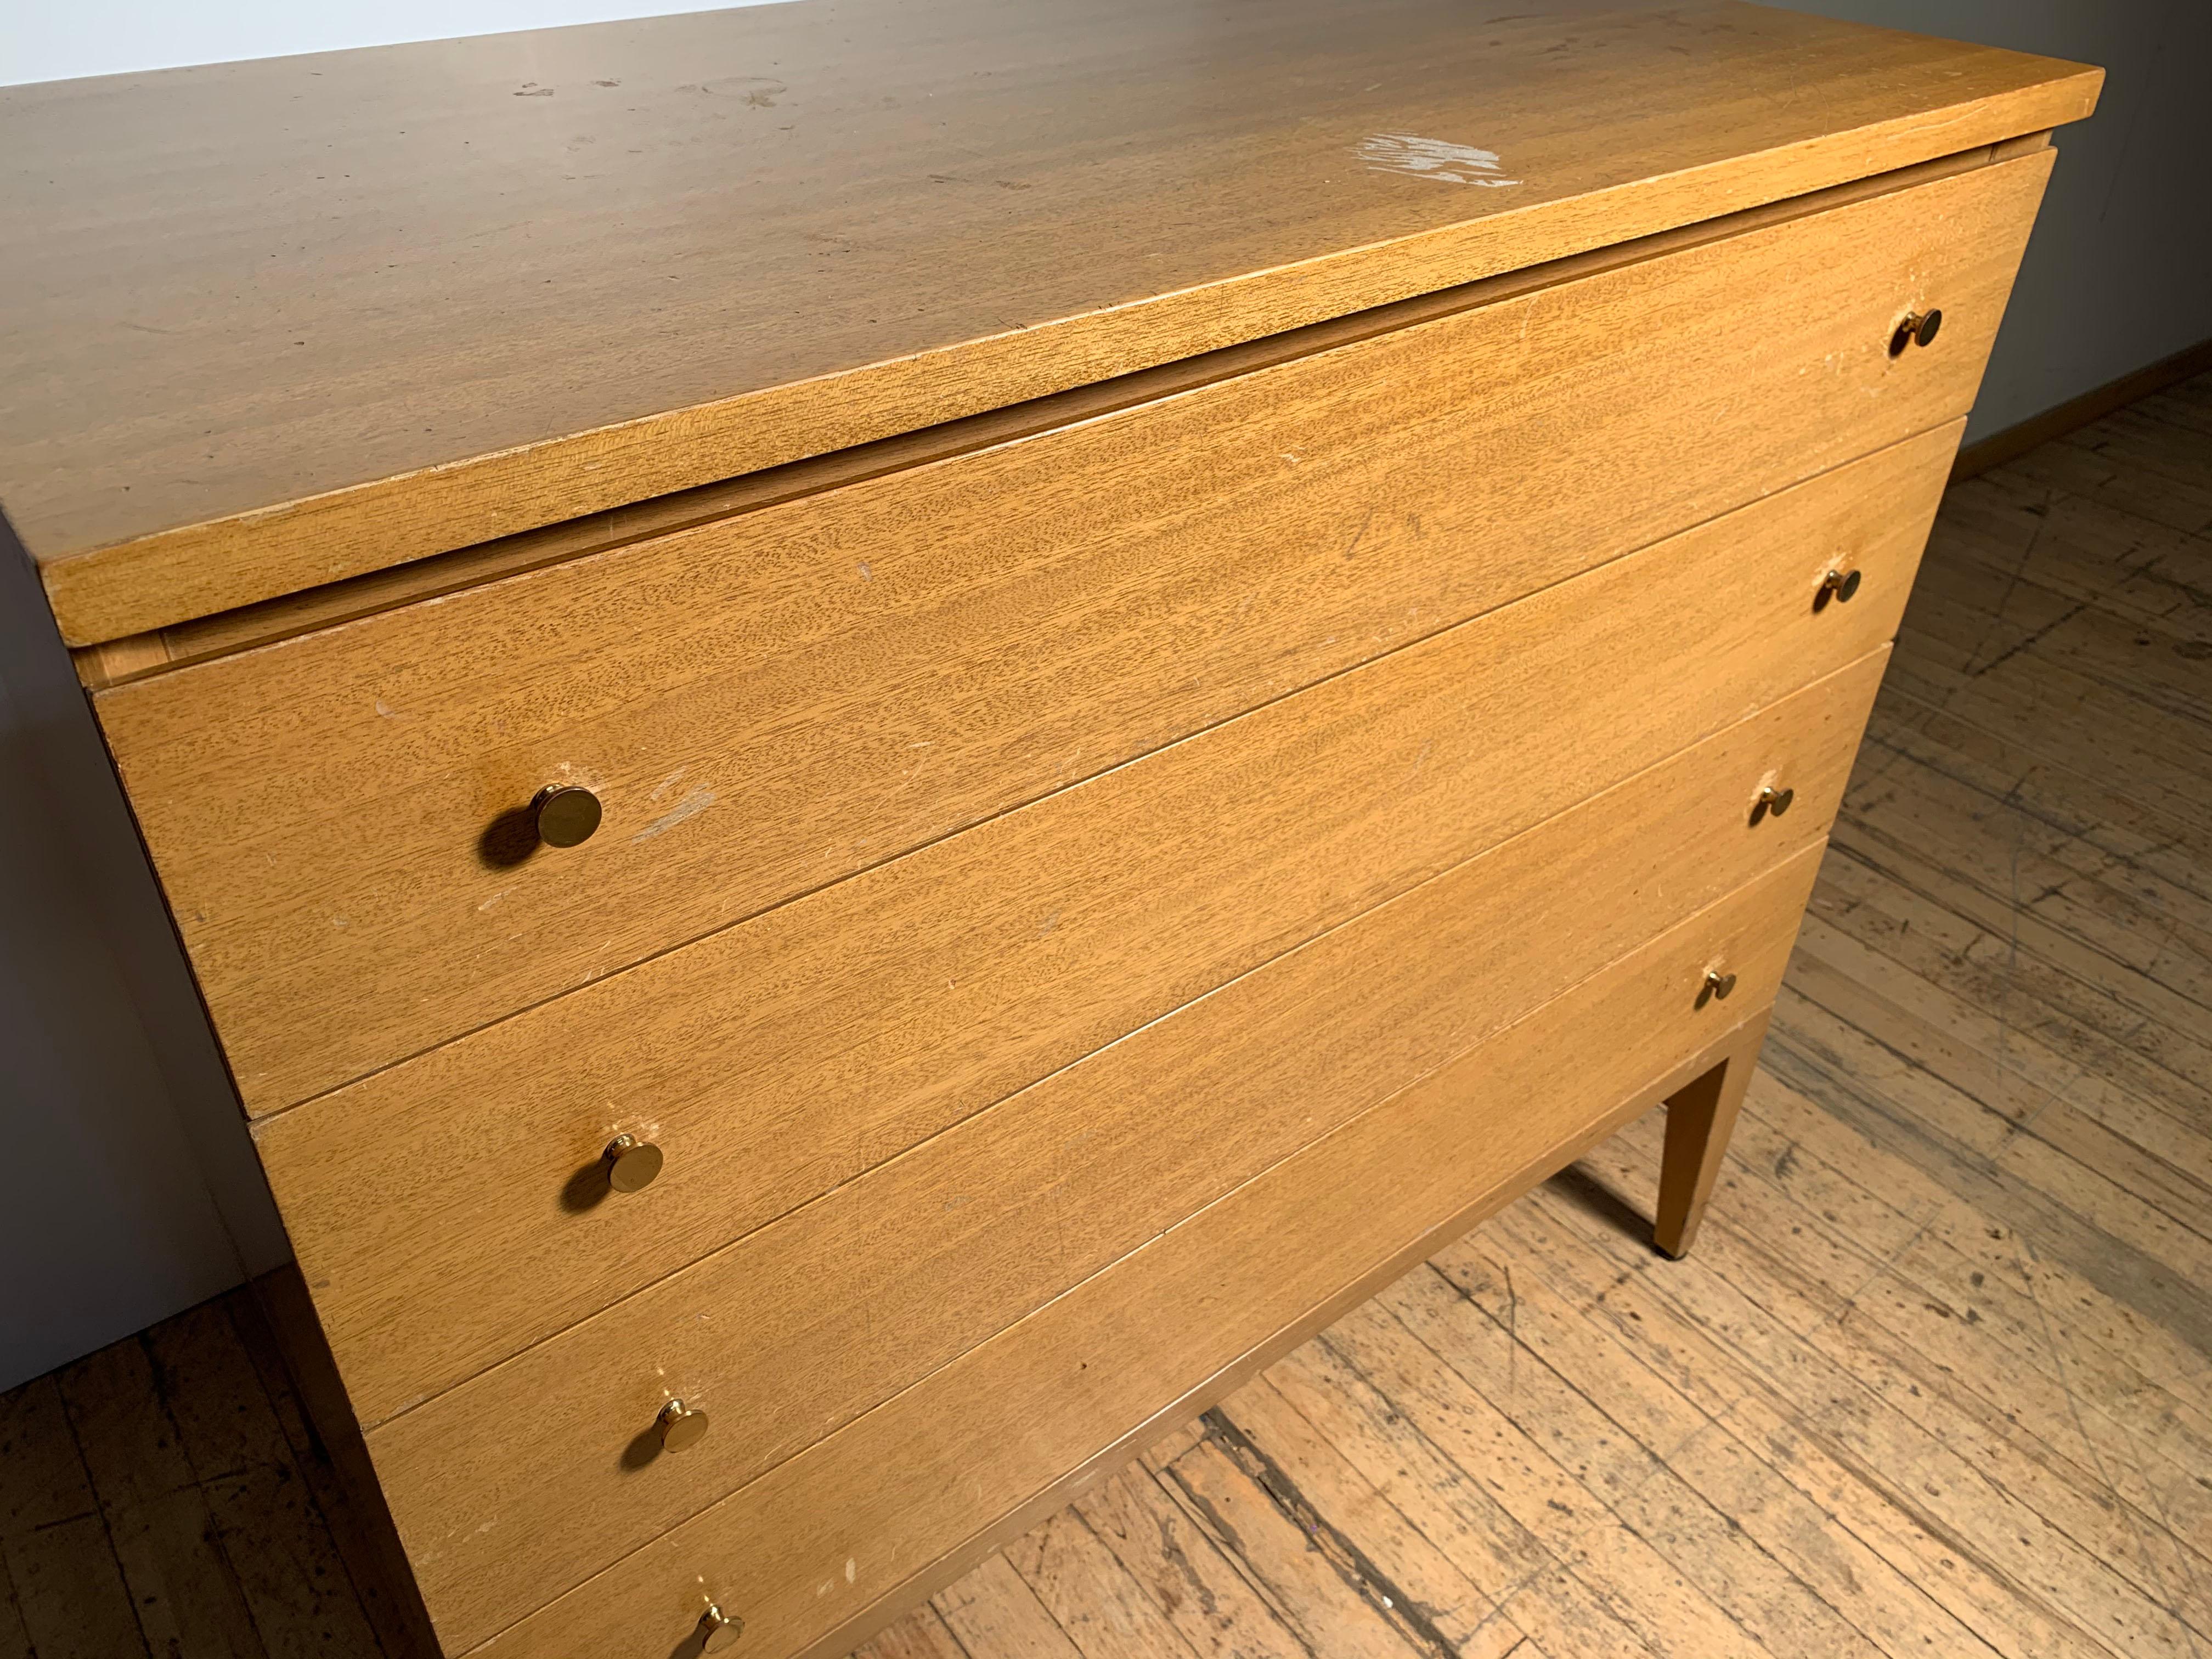 Mid-Century Modern Paul Mccobb Vintage Dresser for Calvin The Irwin Collection For Sale